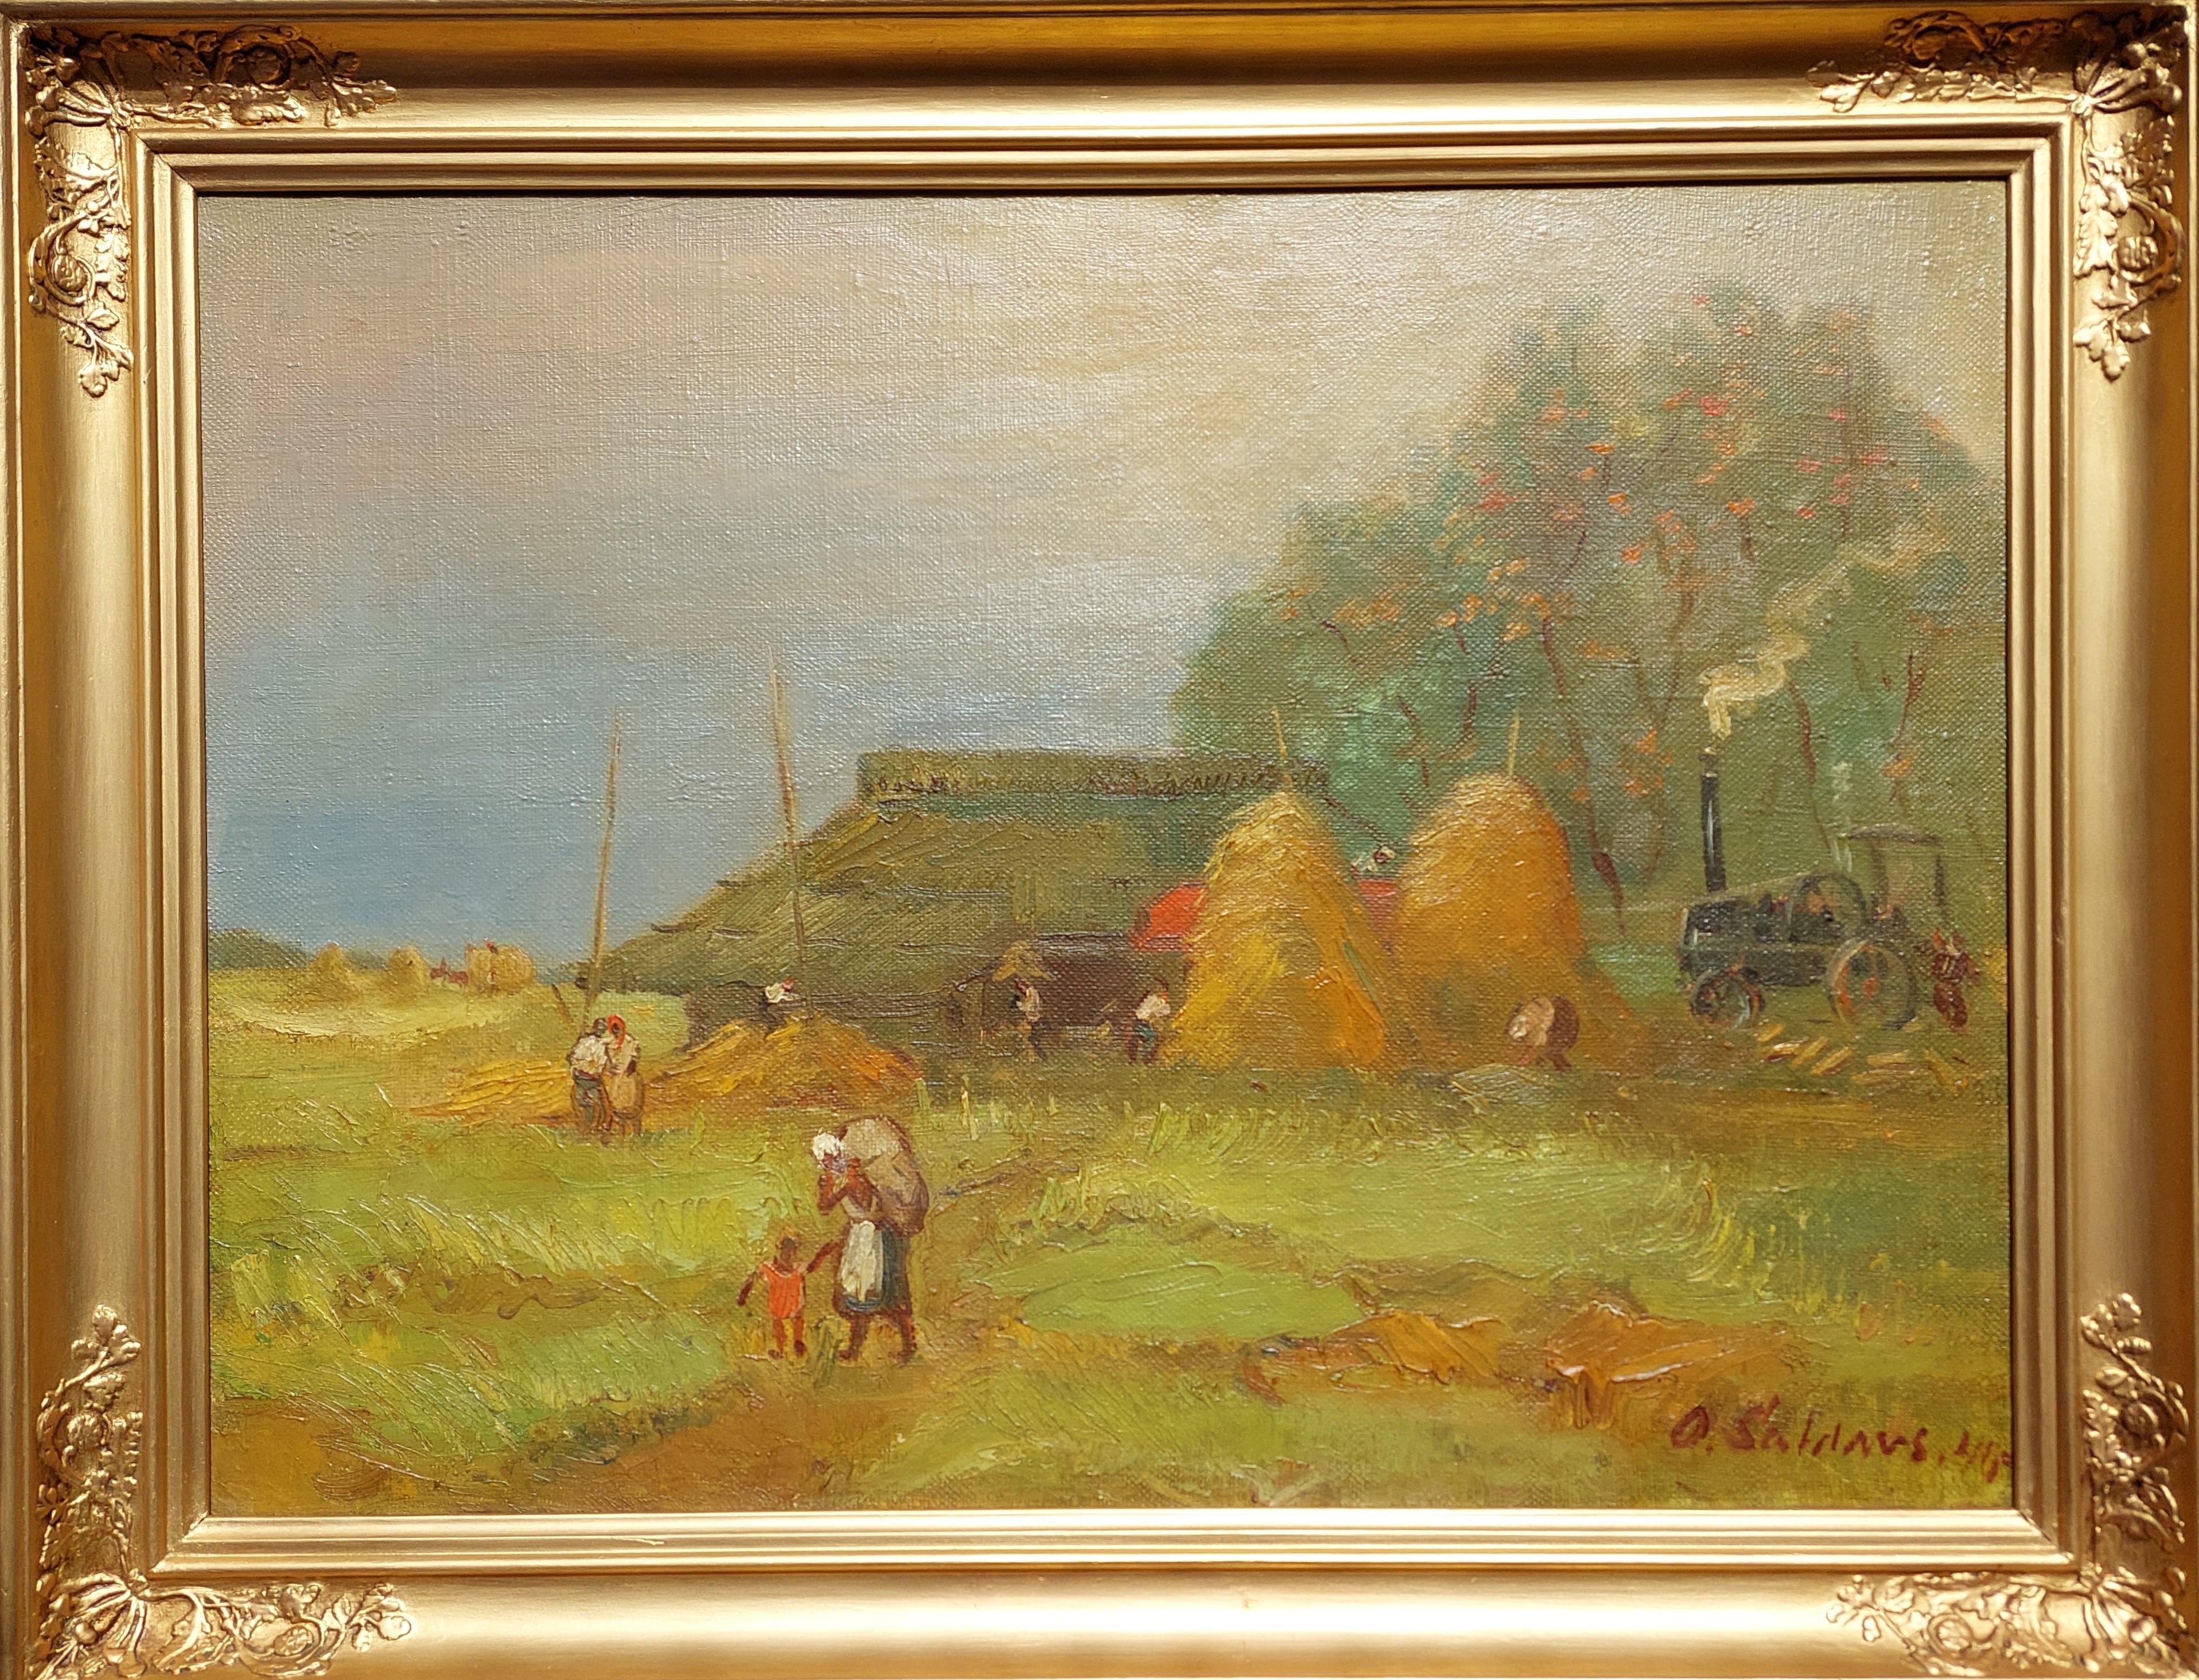 Threshing 1940. Canvas, oil. 54.5x73.5 cm

Artist painted scene of every day life of countryside people in working atmosphere - threshing and haying. There is captured two haystacks, tractor, barn, and people in working process.

Information about